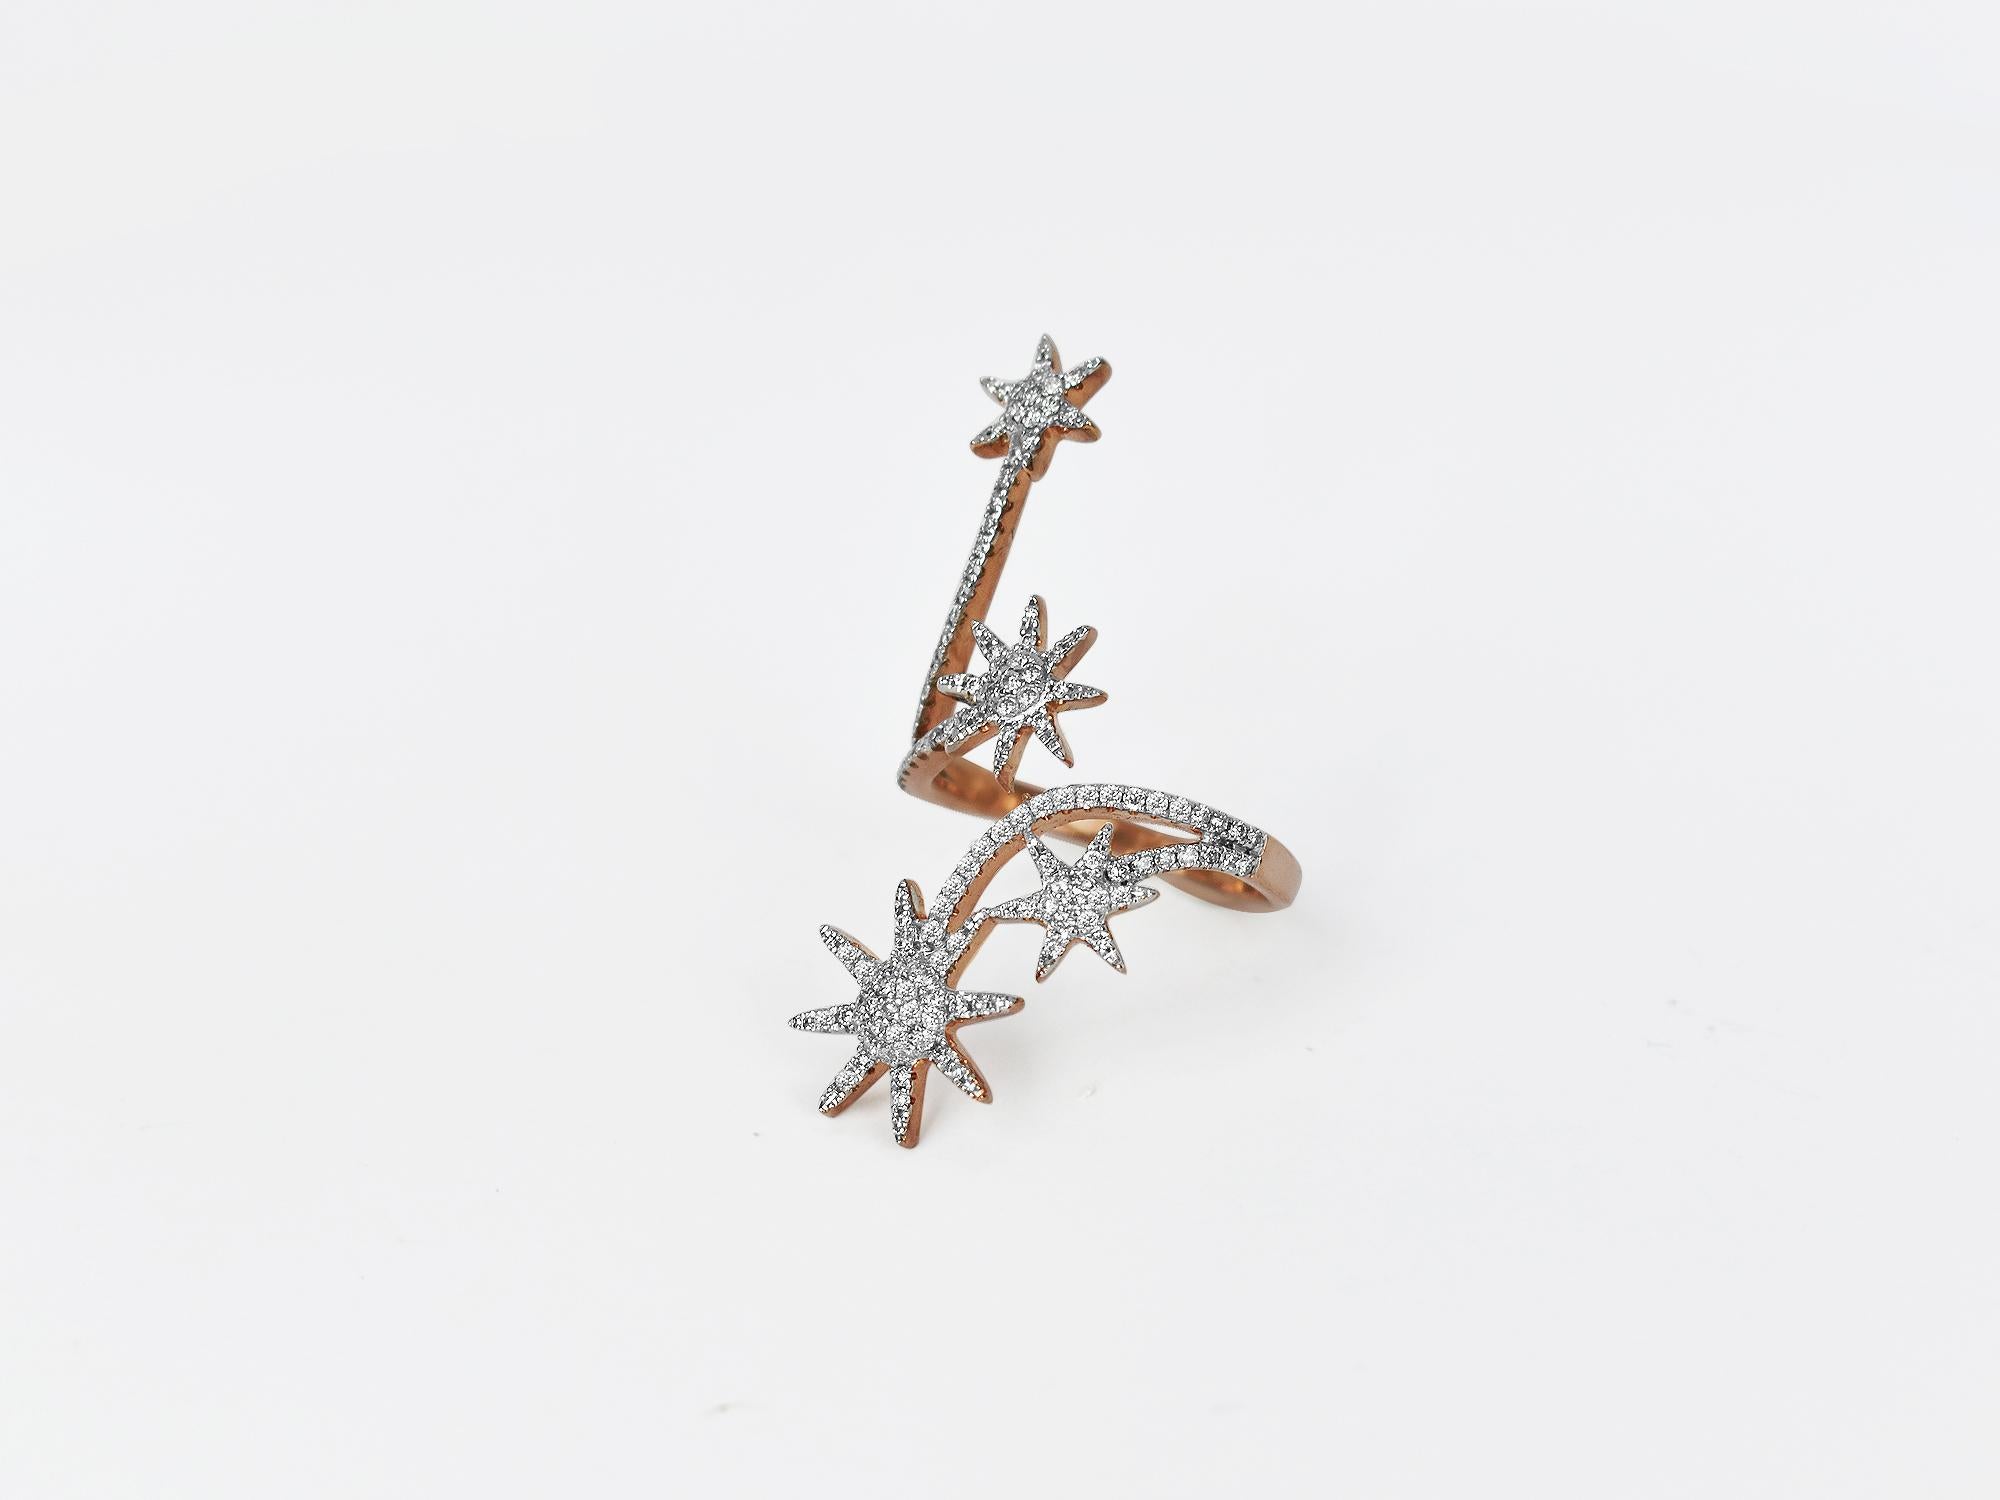             A fashion Art Nouveau starburst ring meticulously crafted to mesmerize. Each part of this art piece shows the passion for jewelry from Oshi Jewels Designs Inc.     
           Sculptural arrangements of small diamonds are designed to